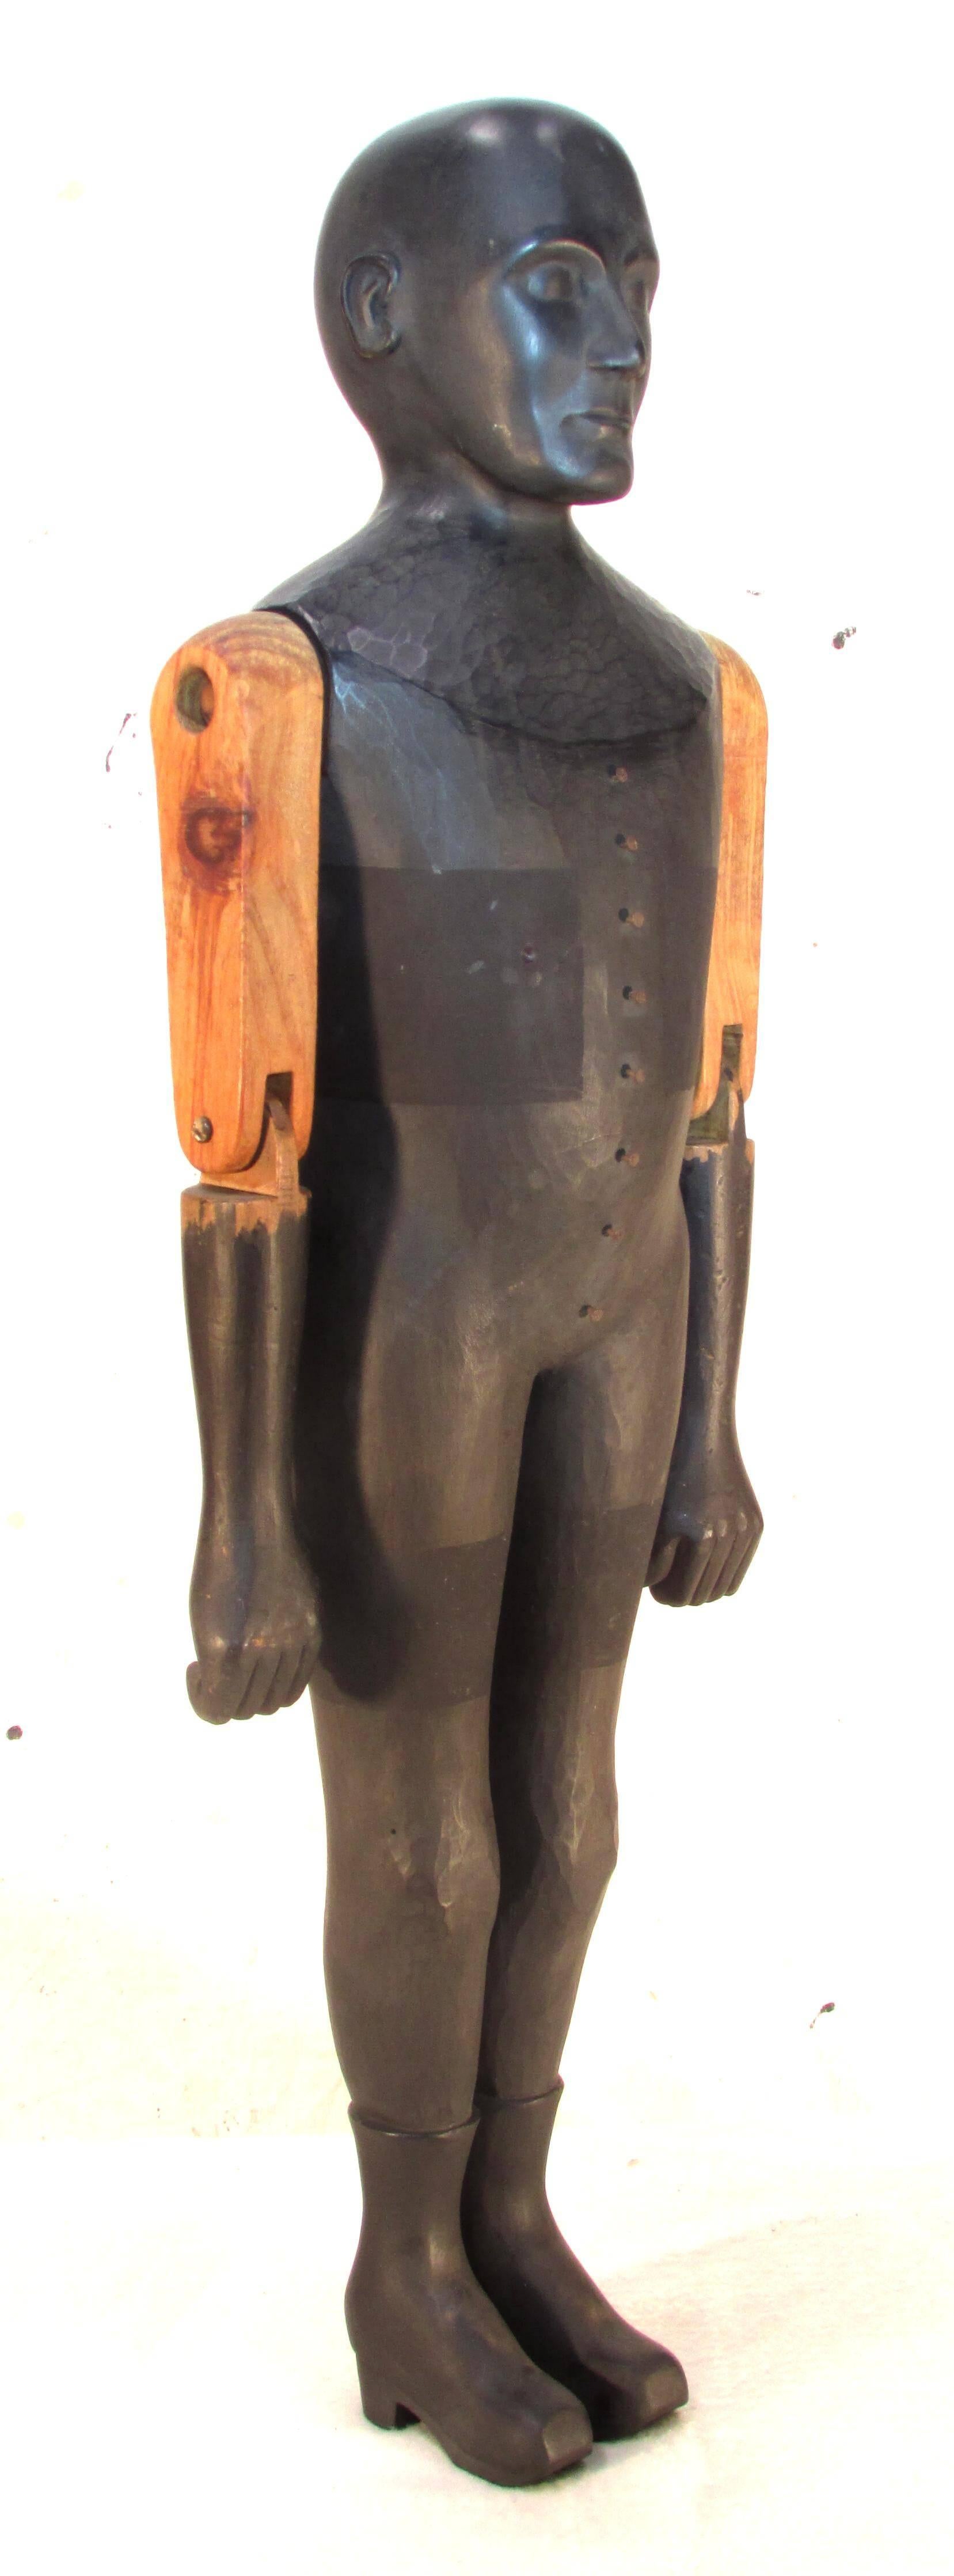 Carved and painted wooden sculpture with articulated arms by contemporary folk artist Mark A. Perry titled 